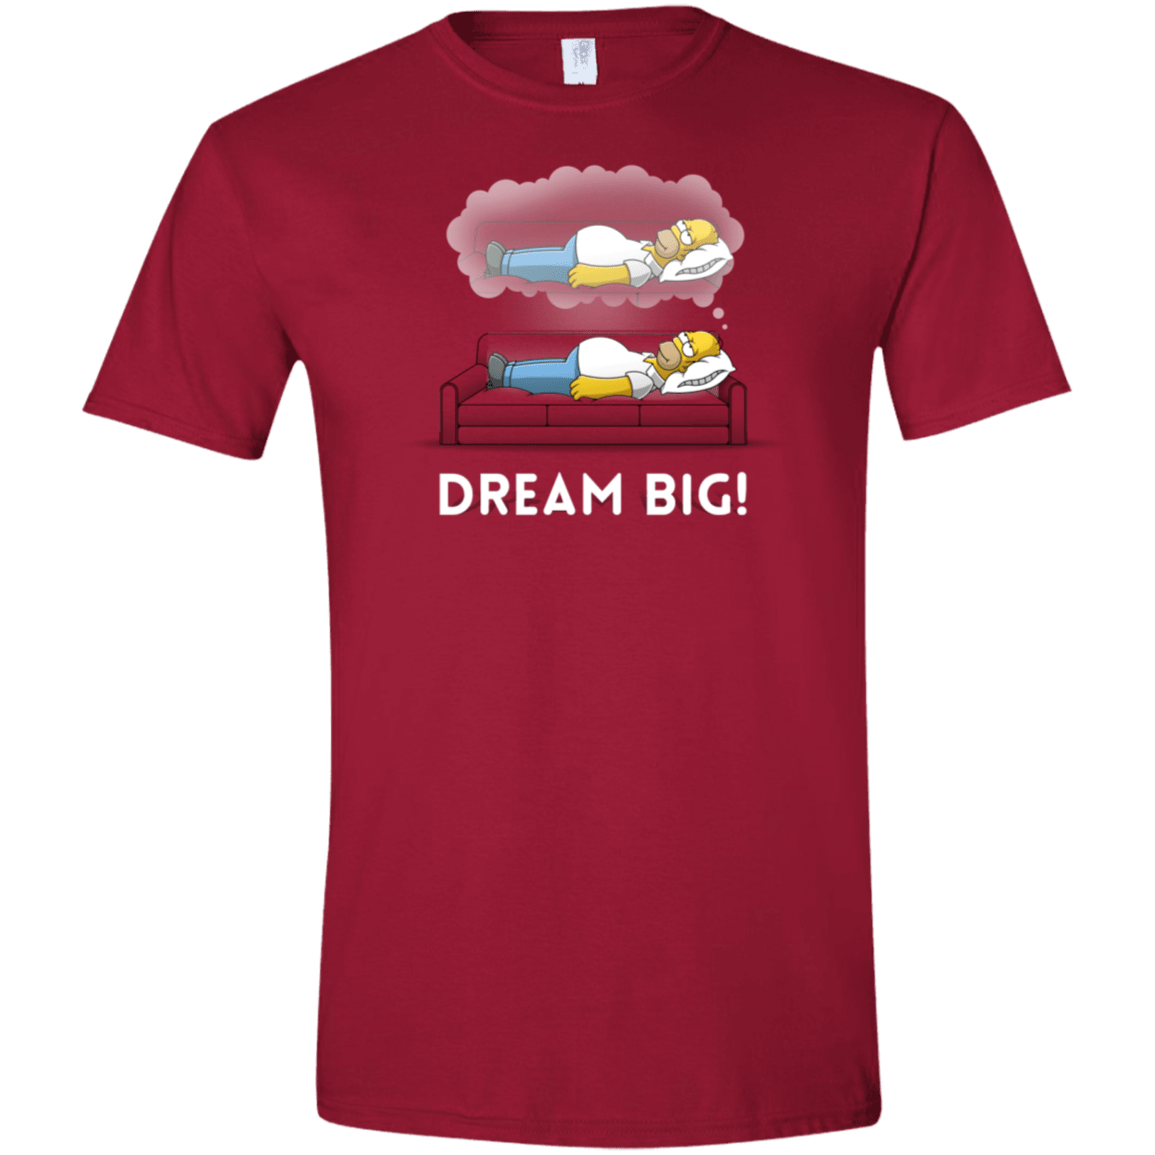 T-Shirts Cardinal Red / S Dream Big! Men's Semi-Fitted Softstyle